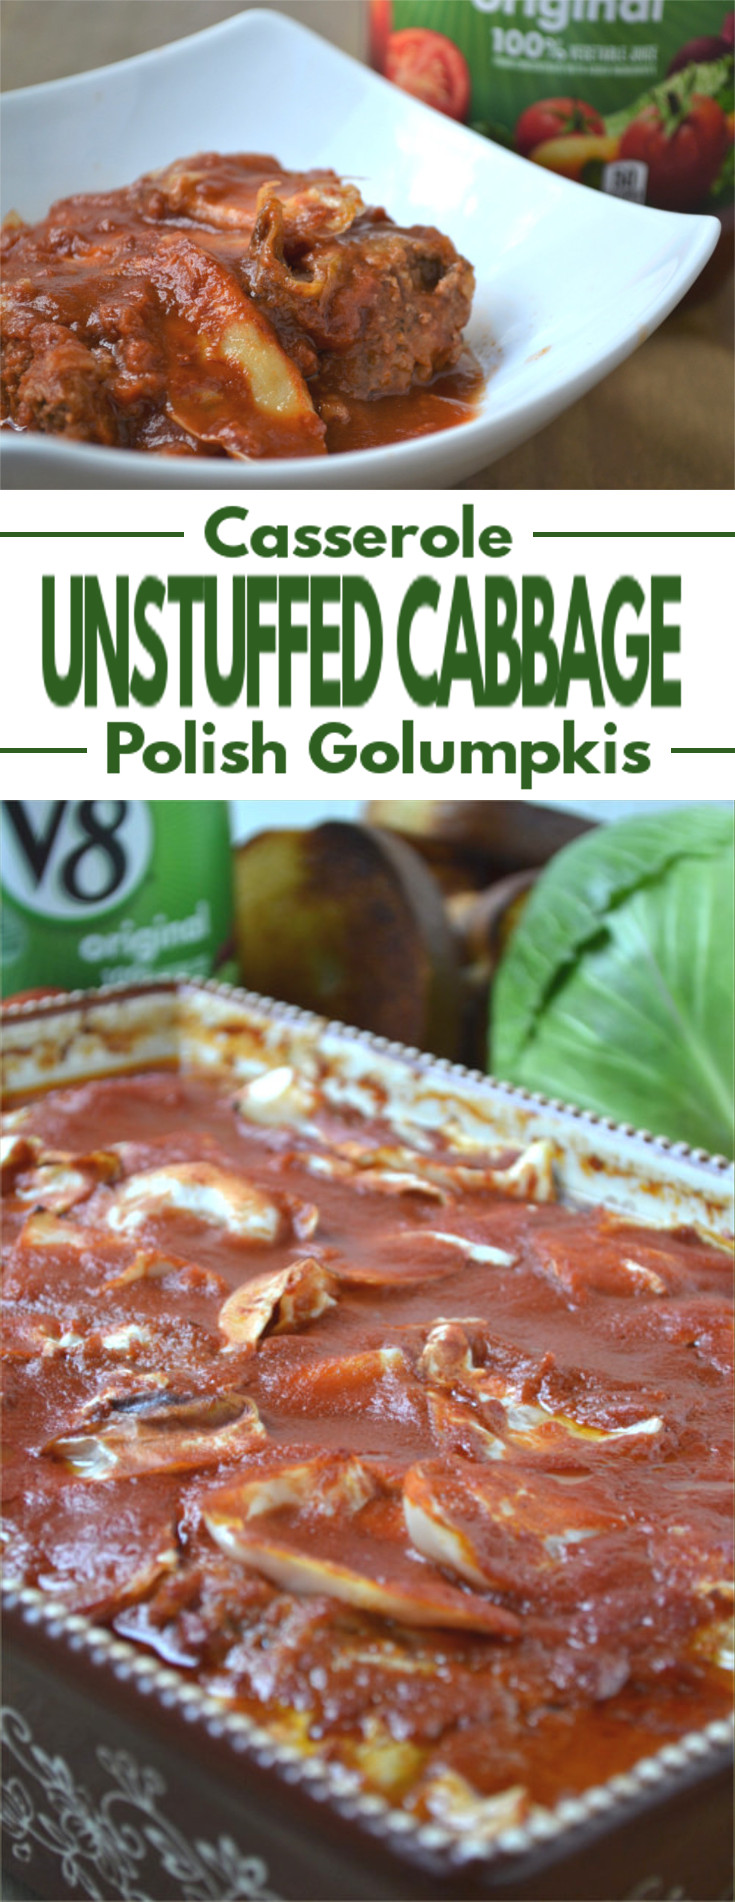 Unrolled Cabbage Casserole - A simple and delicious cabbage and meat recipe covered in a flavorful tomato sauce.